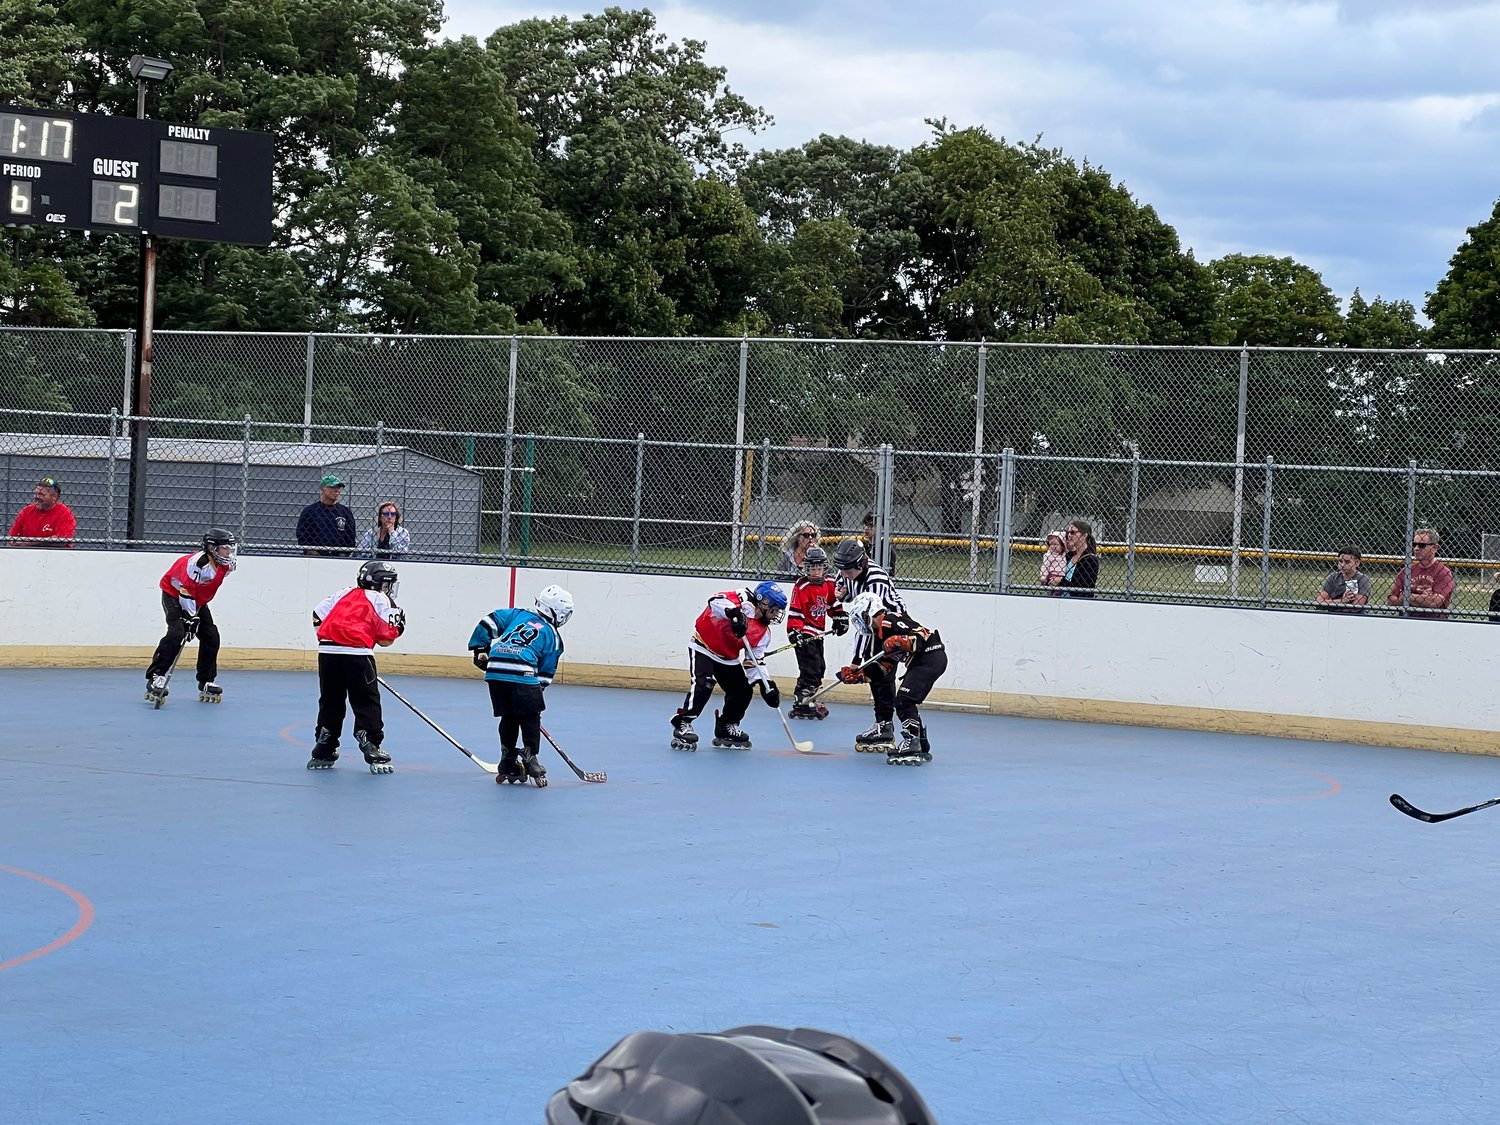 The Roller Hockey League celebrated the game with food, fun and hockey at All-Star Weekend.